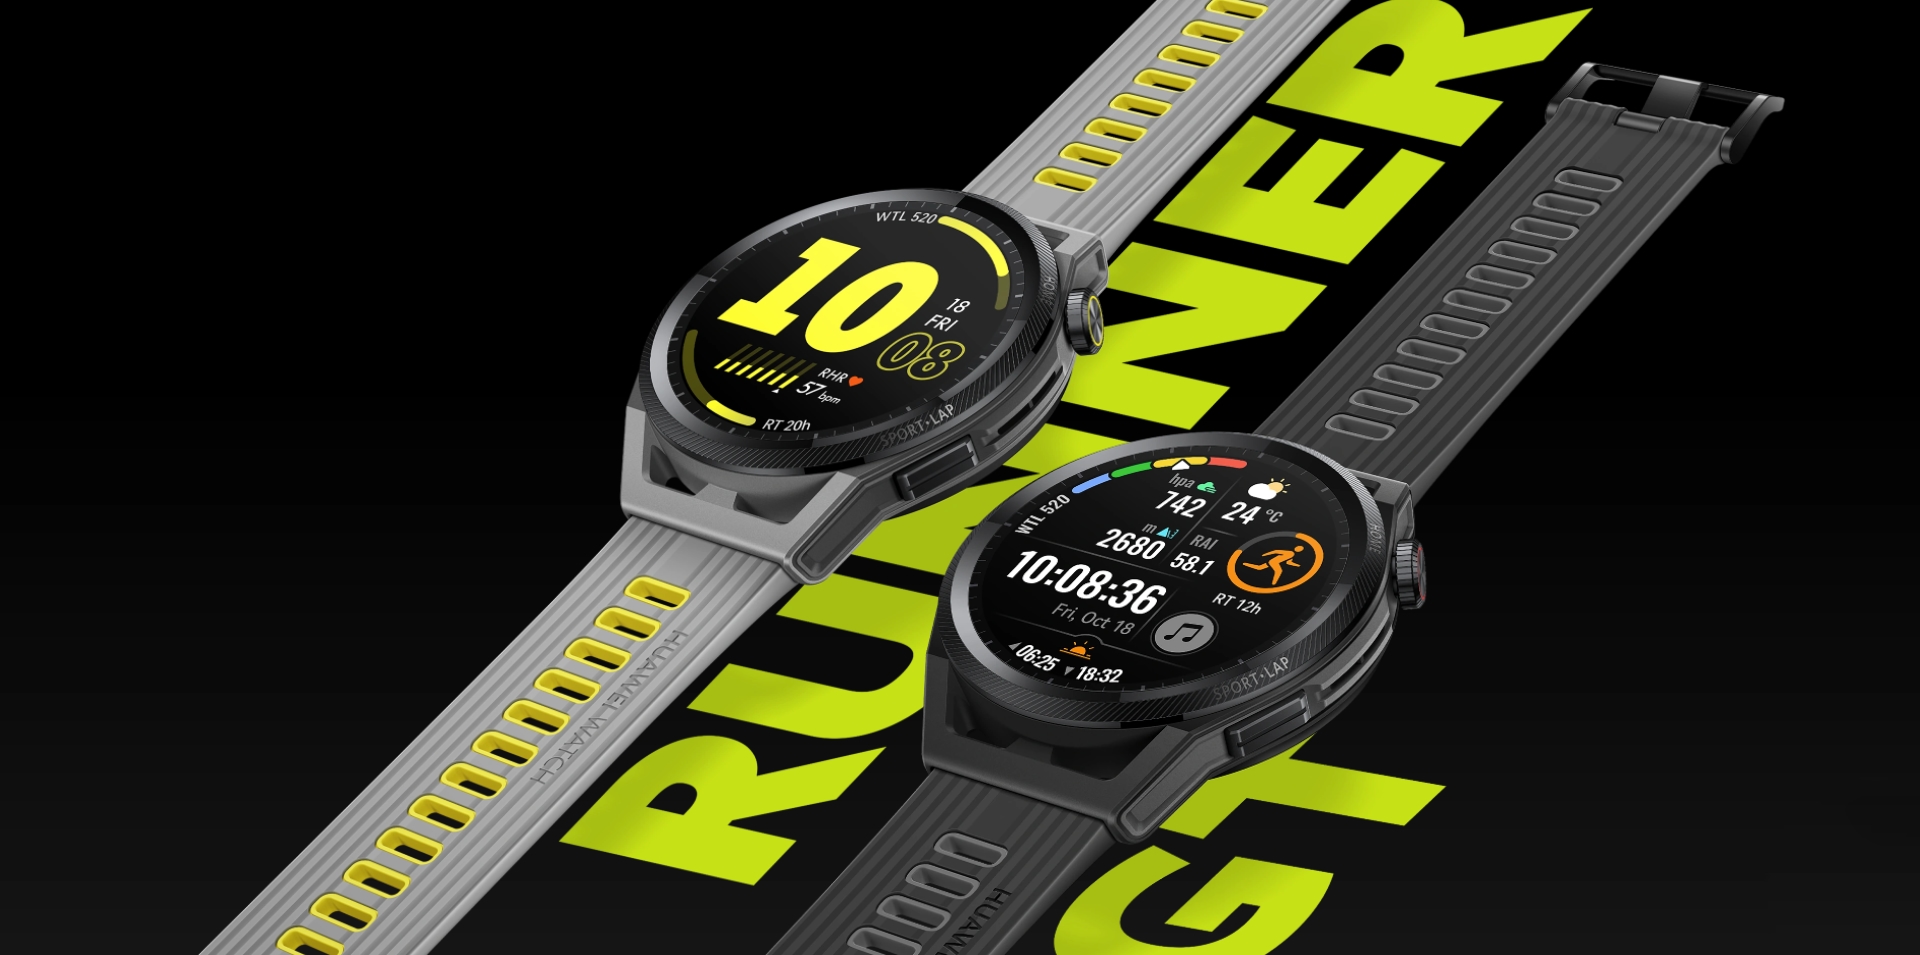 Smart watch Huawei Watch GT Runner with autonomy up to 14 days, HarmonyOS and advanced GPS sensor has entered the global market